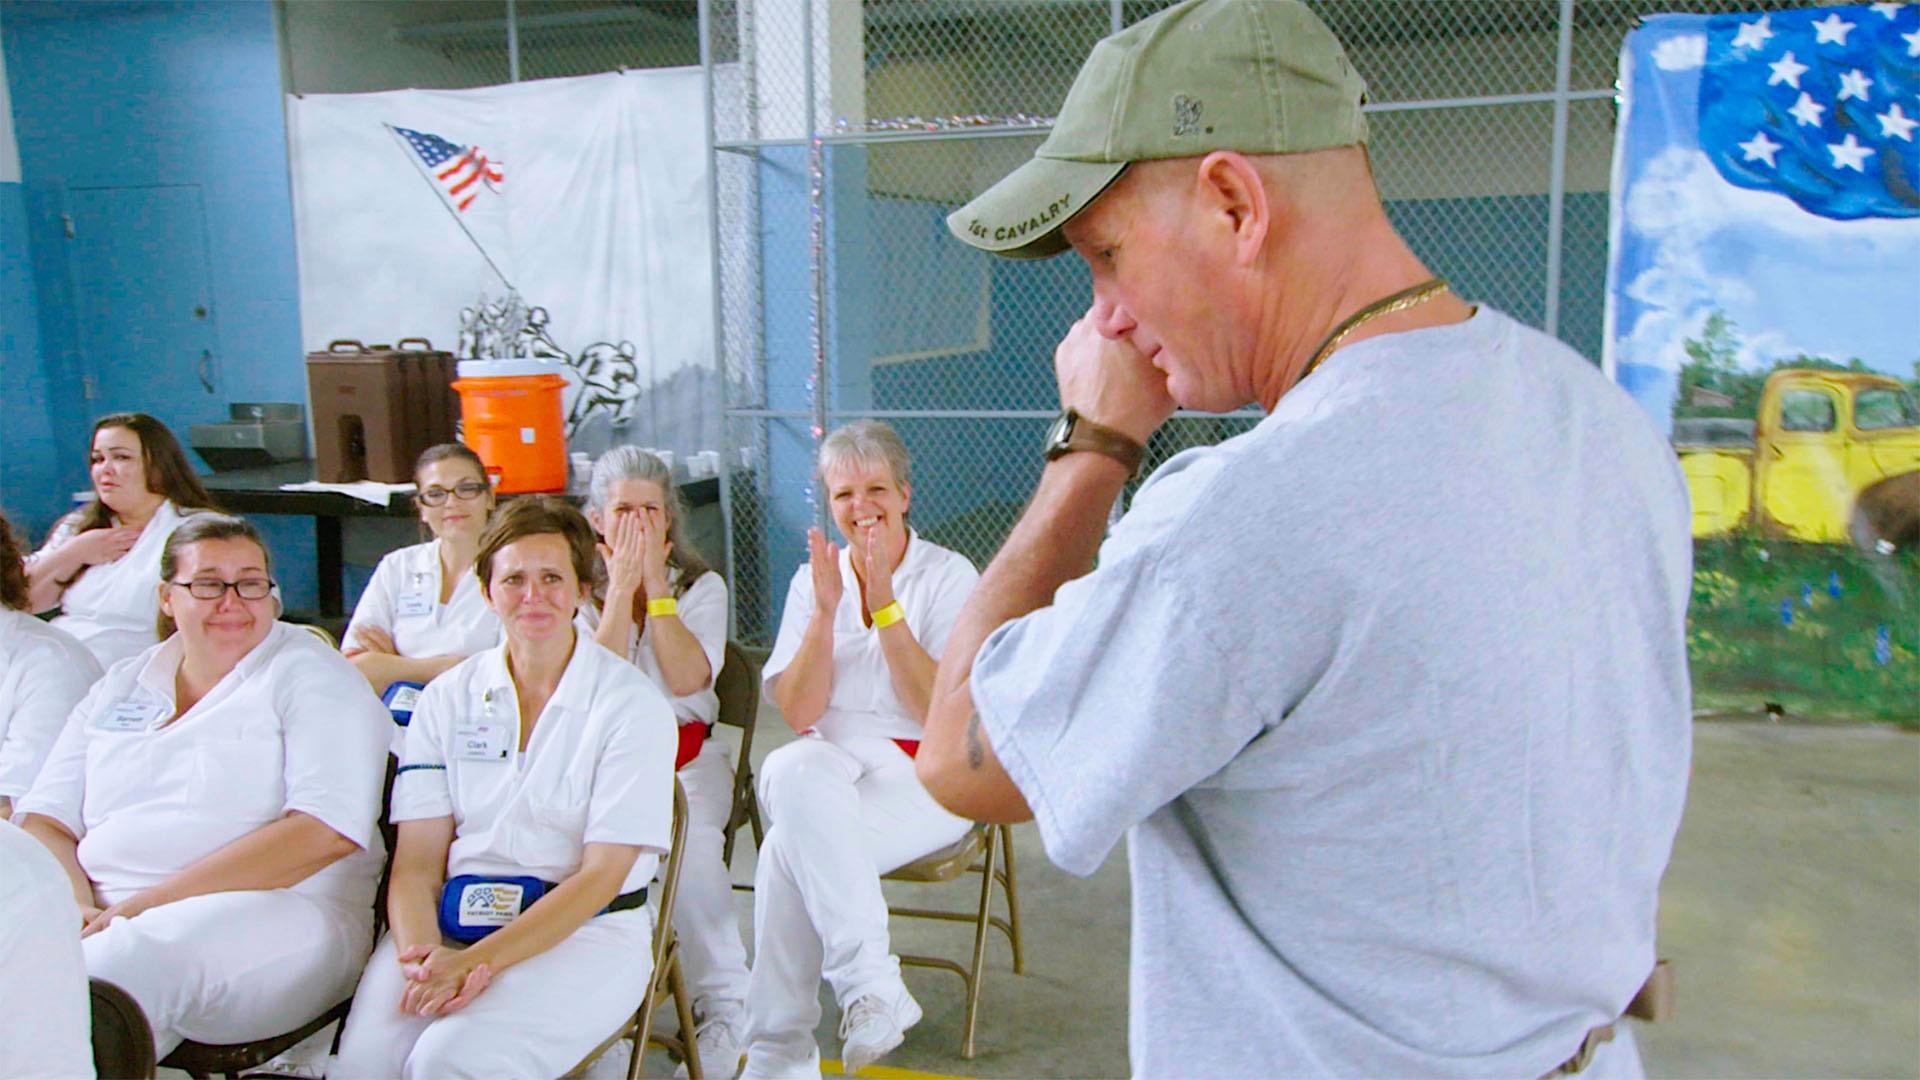 Frank DeFronzo, CPL (Ret.) US Army, with an emotional goodbye to the inmates.